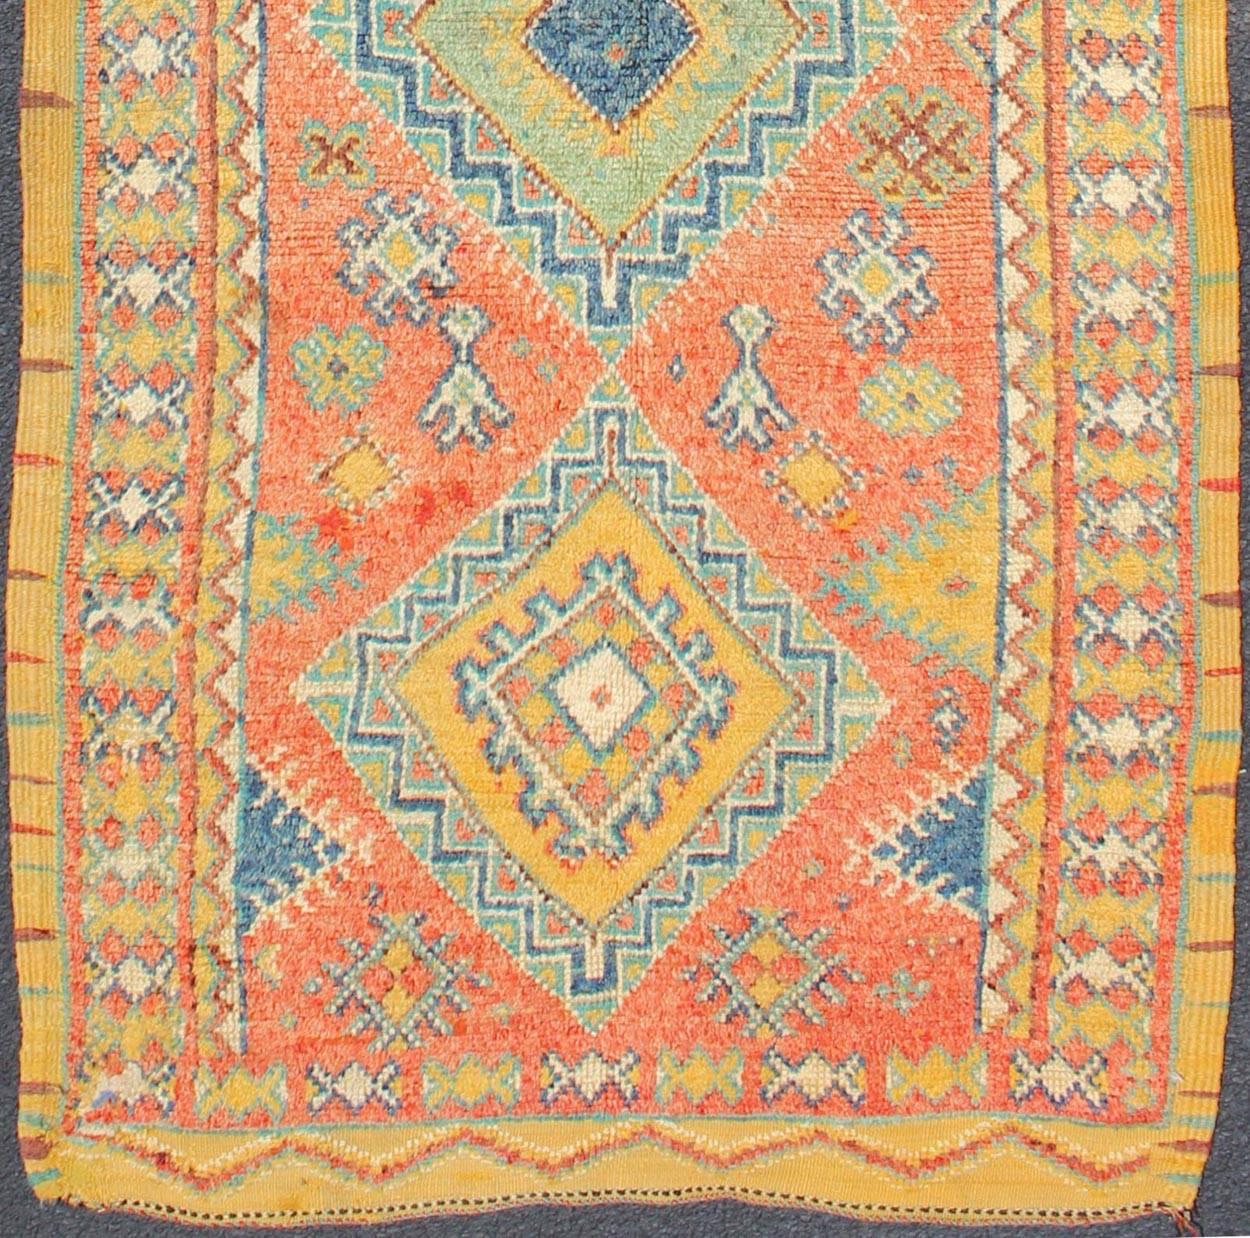 Colorful Moroccan Runner in Orange, Blue, Yellow and Gold Colors.
Rendered with four medallions and random spotted and speckled shapes, this unique Moroccan runner displays a harmonious and rich color palette of oranges, reds, blues, golds and light